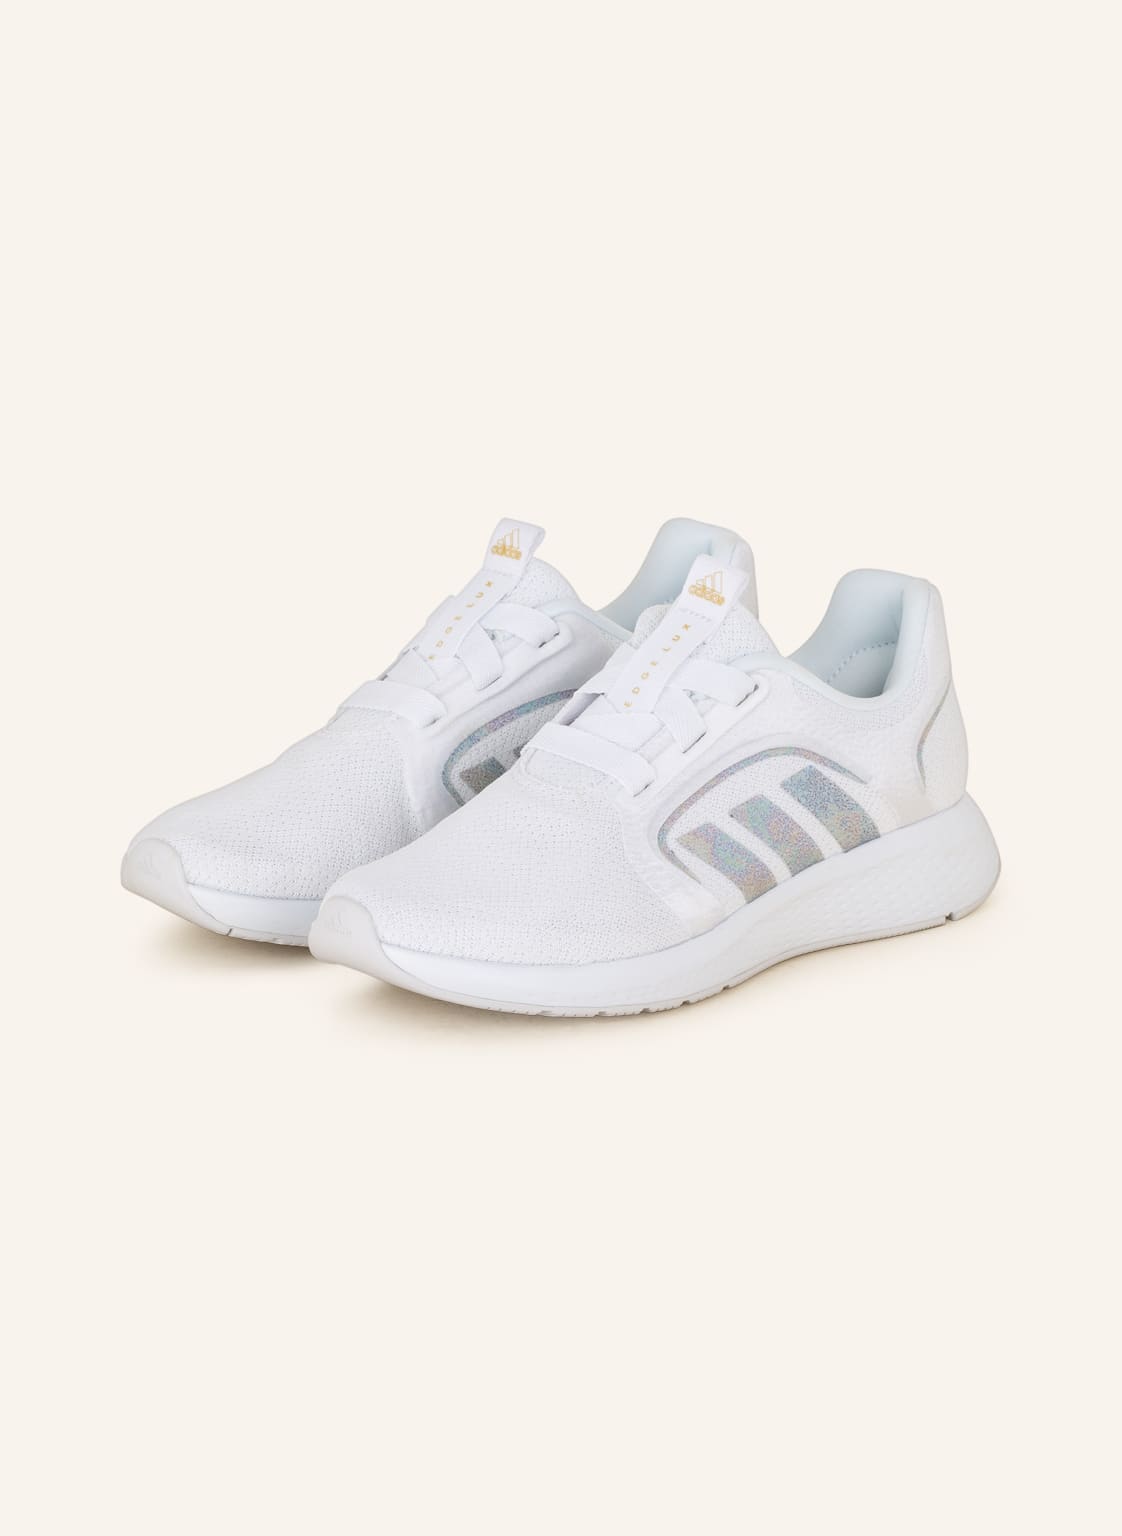 Image of Adidas Fitnessschuhe Edge Lux 5 weiss